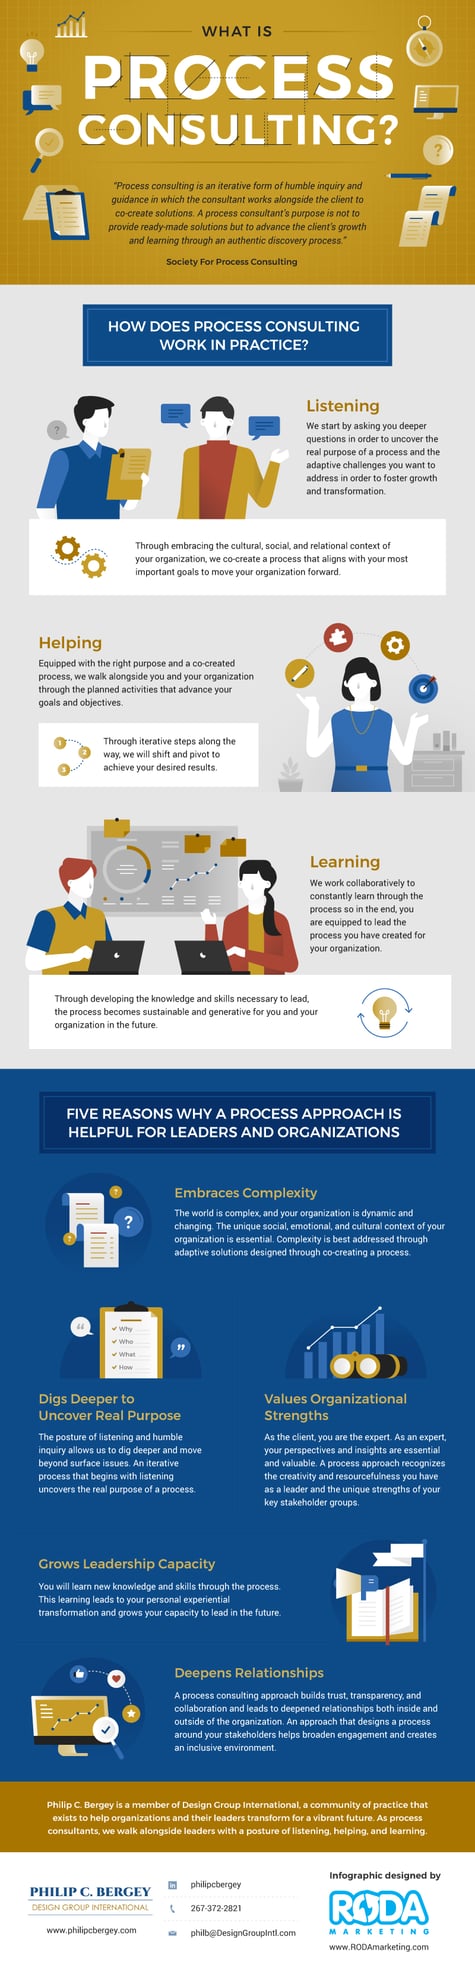 What is Process Consulting Infographic_Phil Bergey